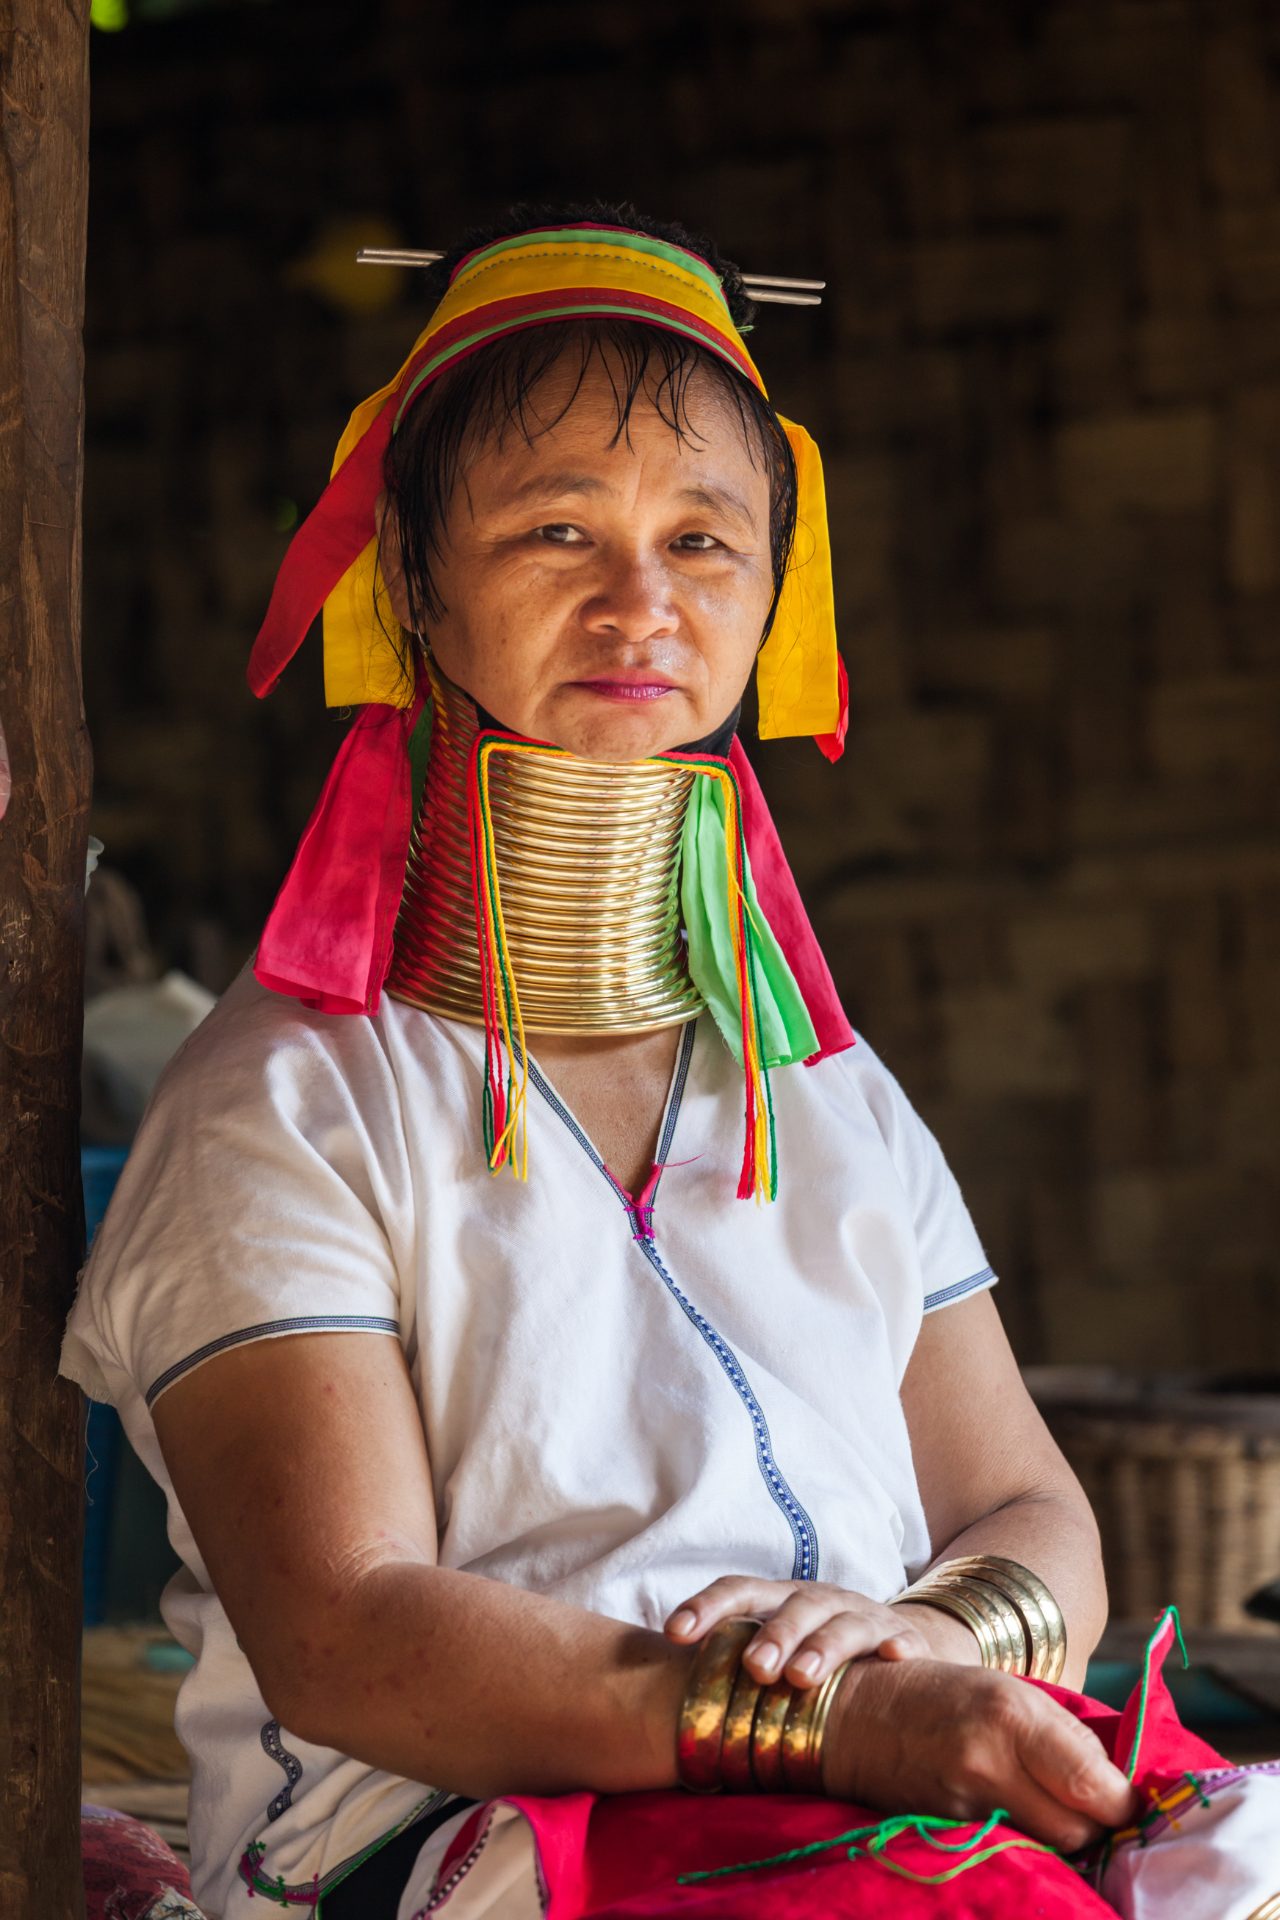 This image showcases a Kayan (Padaung) woman in Thailand, highlighting her characteristic neck rings.